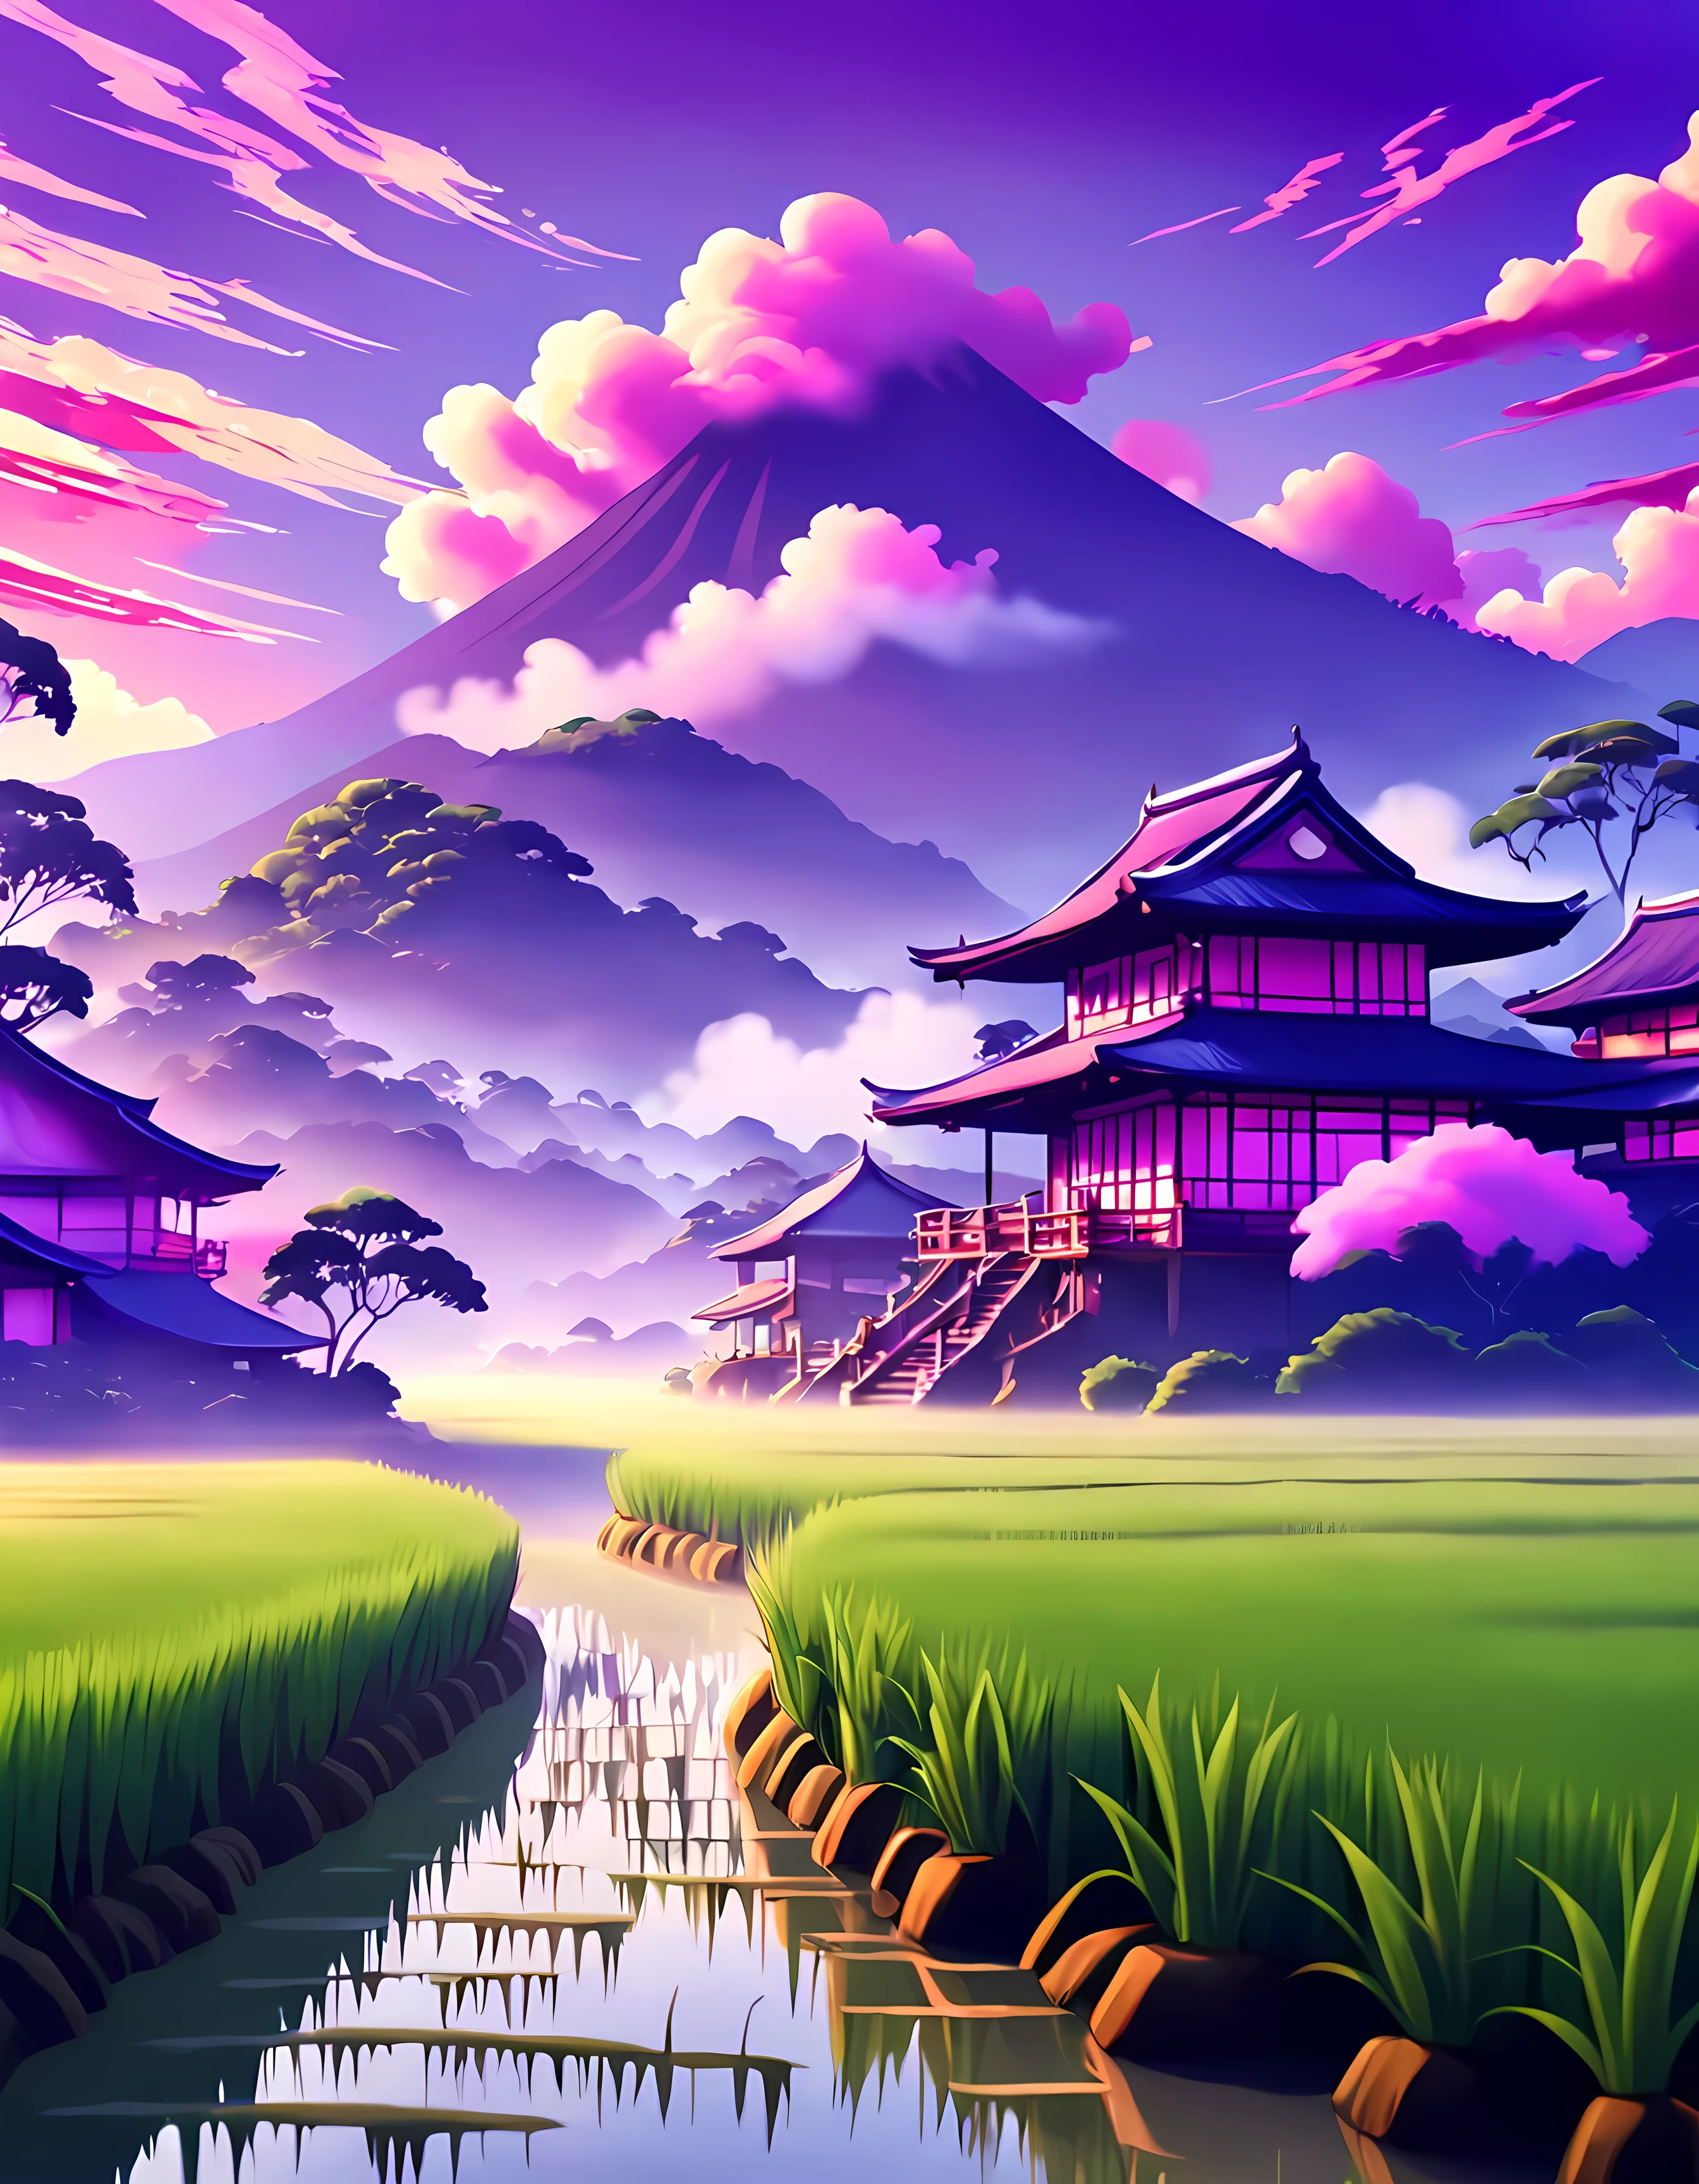 (Surrelasim:1.4), cute anime style, design a captivating image of a ((mystical mist)) hovering above a ((lush rice paddy)), mesmerizing dawn with hues of orange, pink and purple, (Japanese architecture), cloudy, dreamy, masterpiece in maximum 16K resolution, superb quality. | ((More_Detail))
